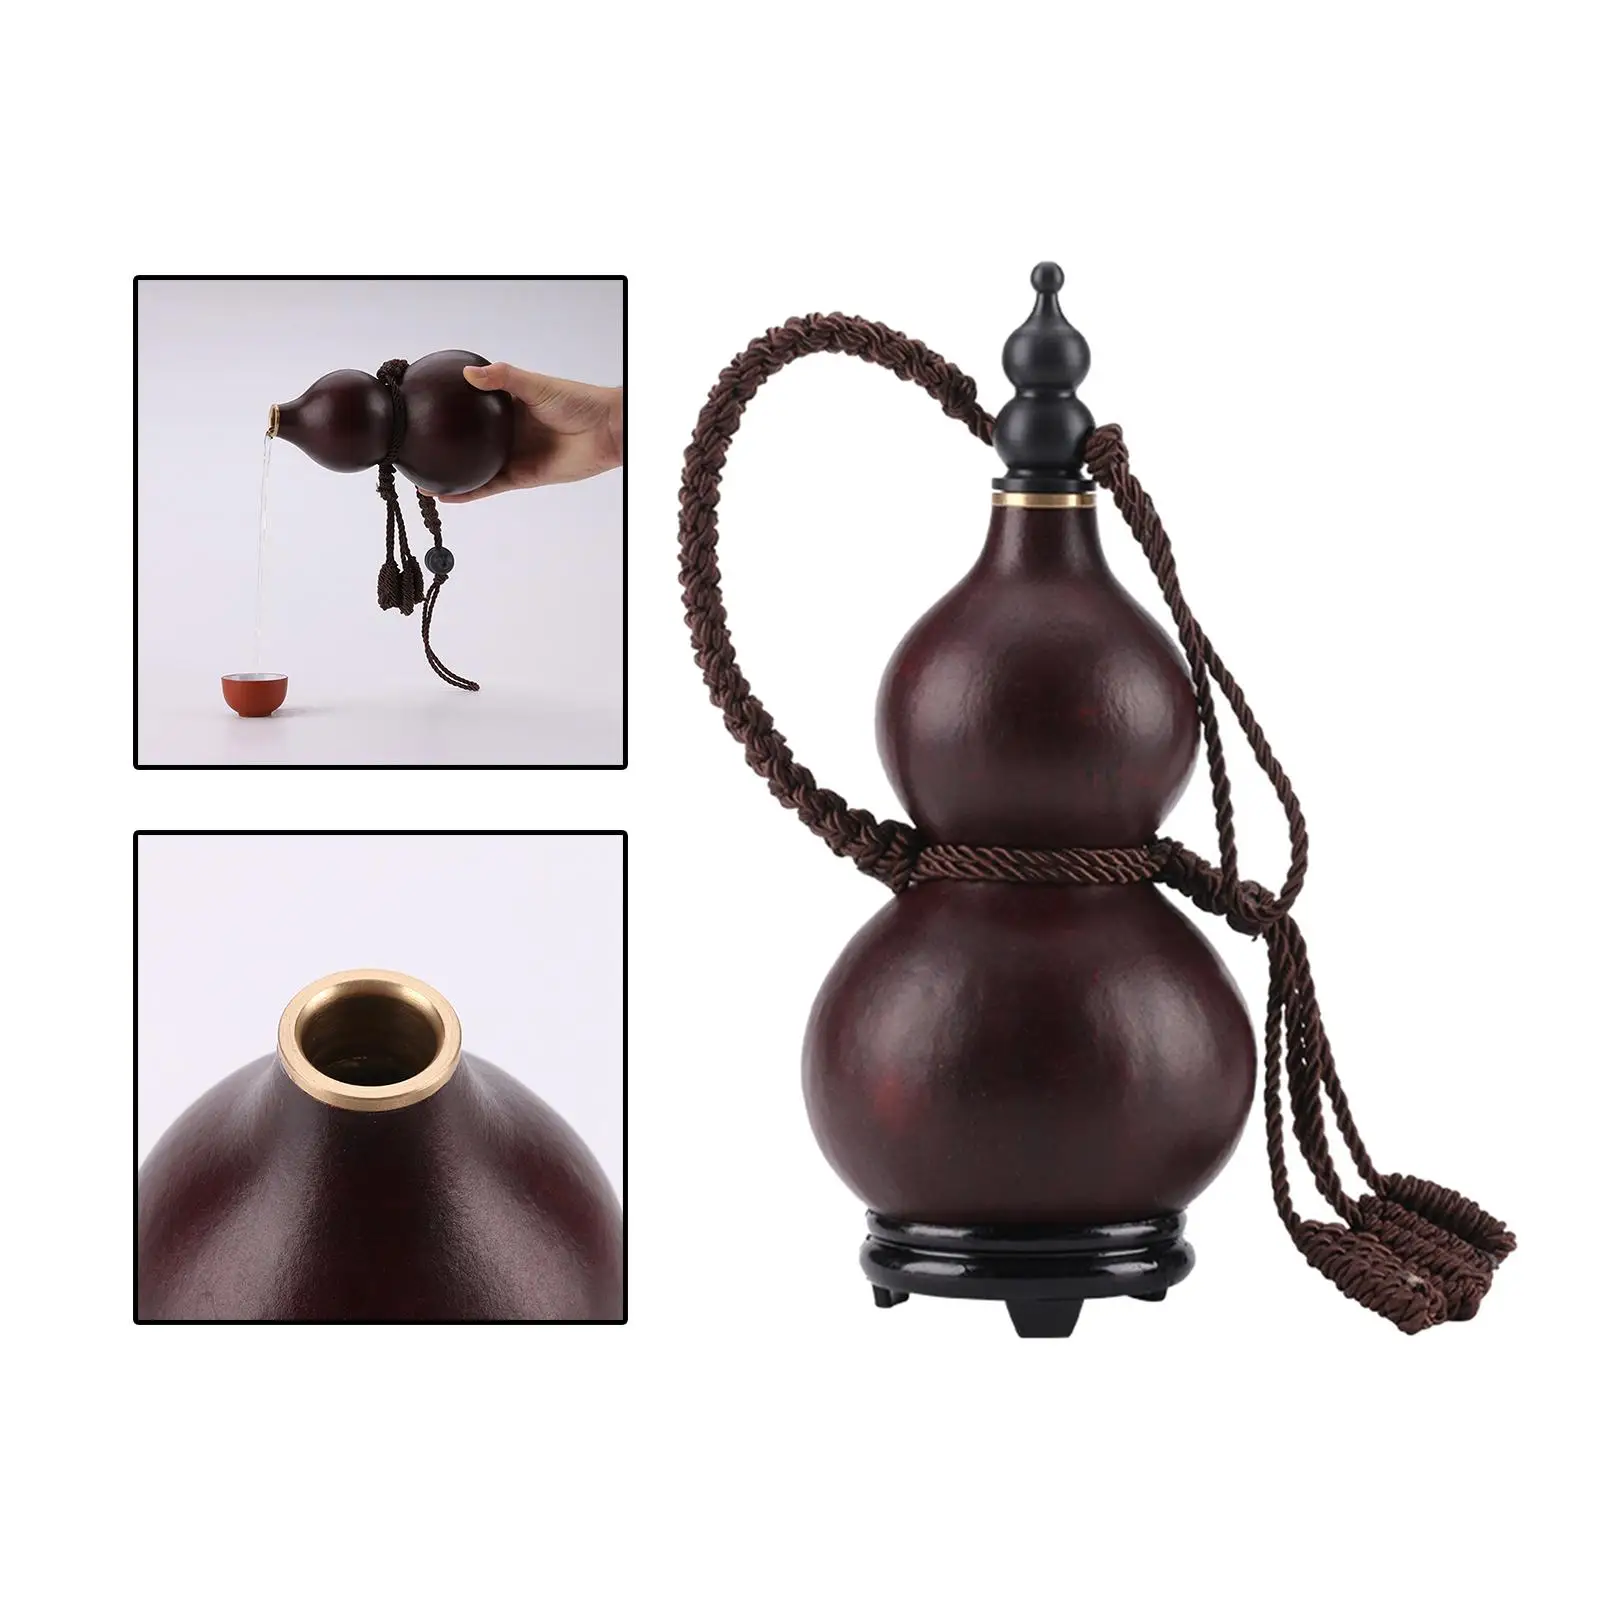 Traditional Gourd Wine Bottle with Lid Beeswax Waterproof Drinking Gourd for Indoor Drinks Holder home Decoration